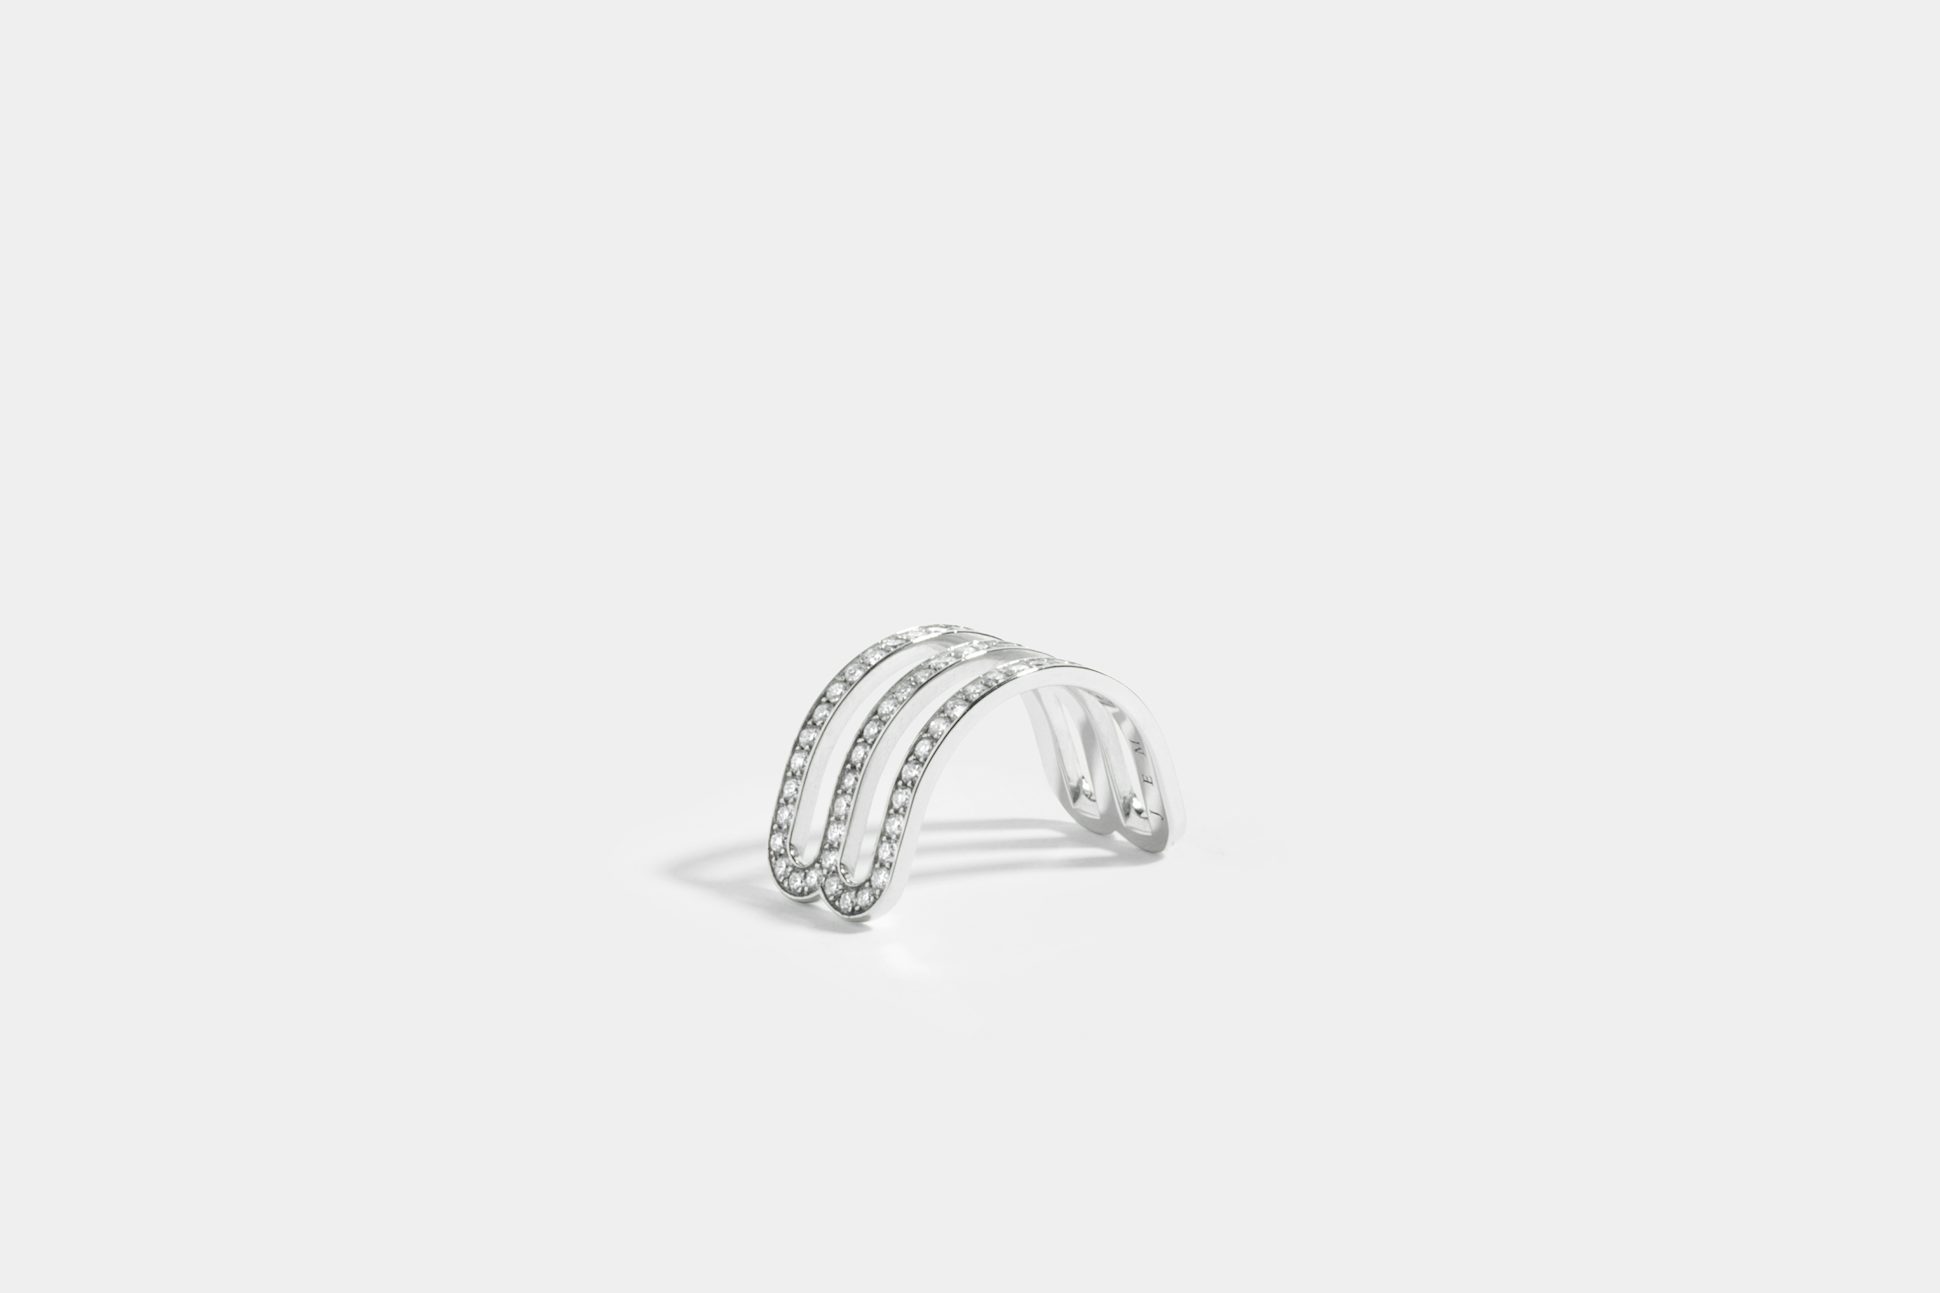 Étreintes double half-ring in 18k Fairmined ethical white gold, paved with lab-grown diamonds.